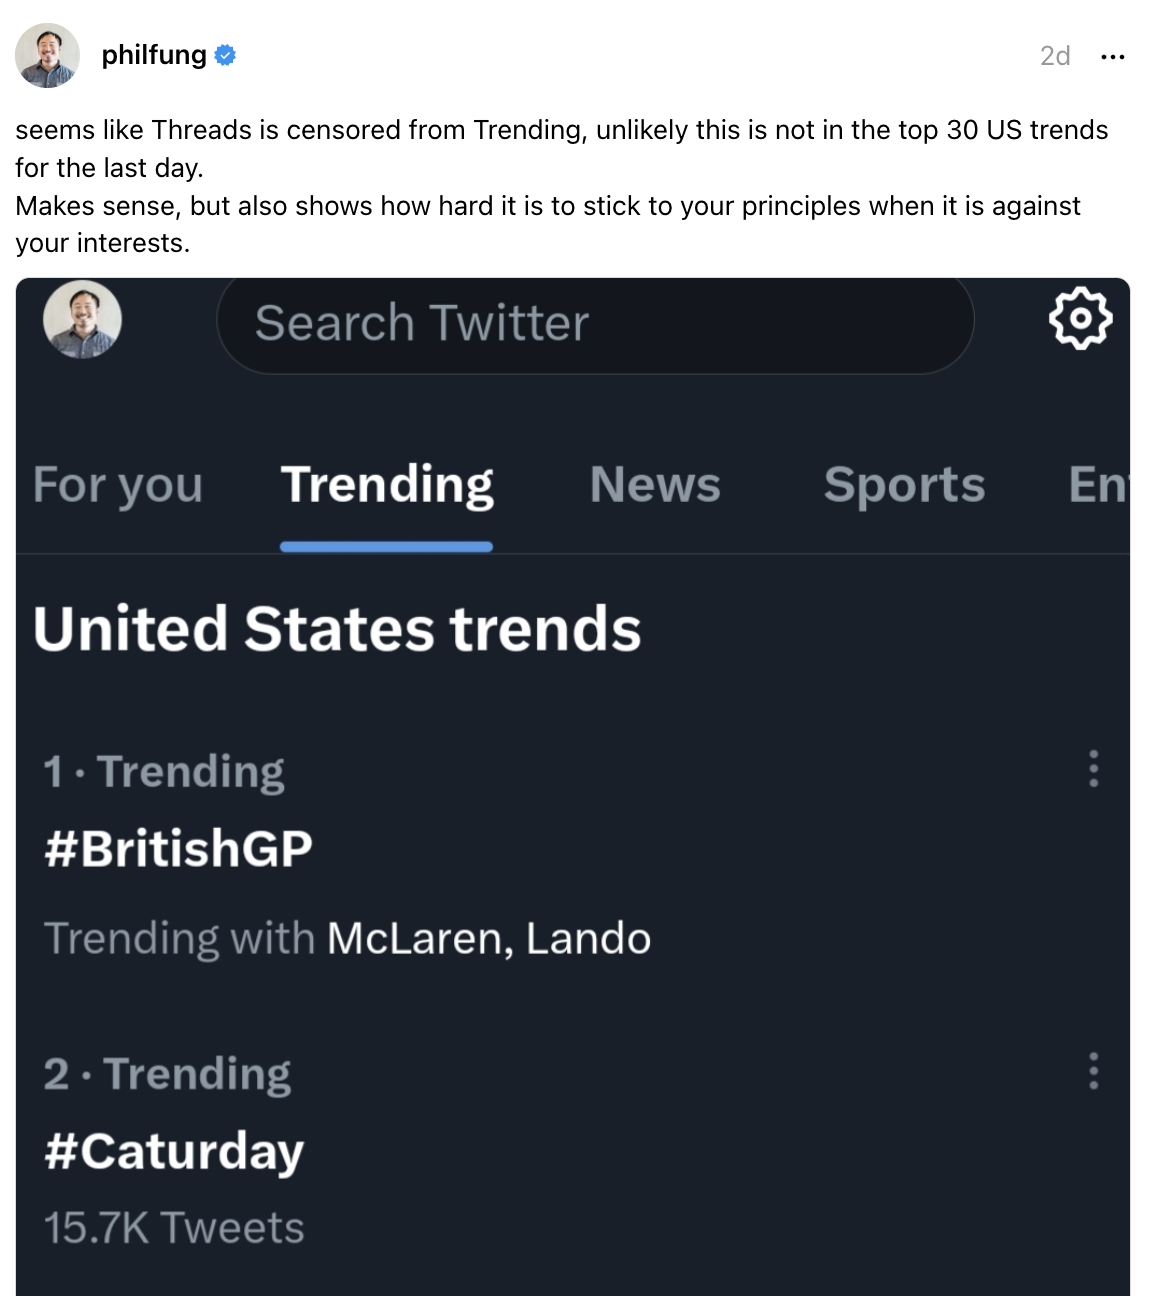 Screenshot of trending things on Twitter that day including &quot;#BritishGP&quot; and #Caturday&quot;